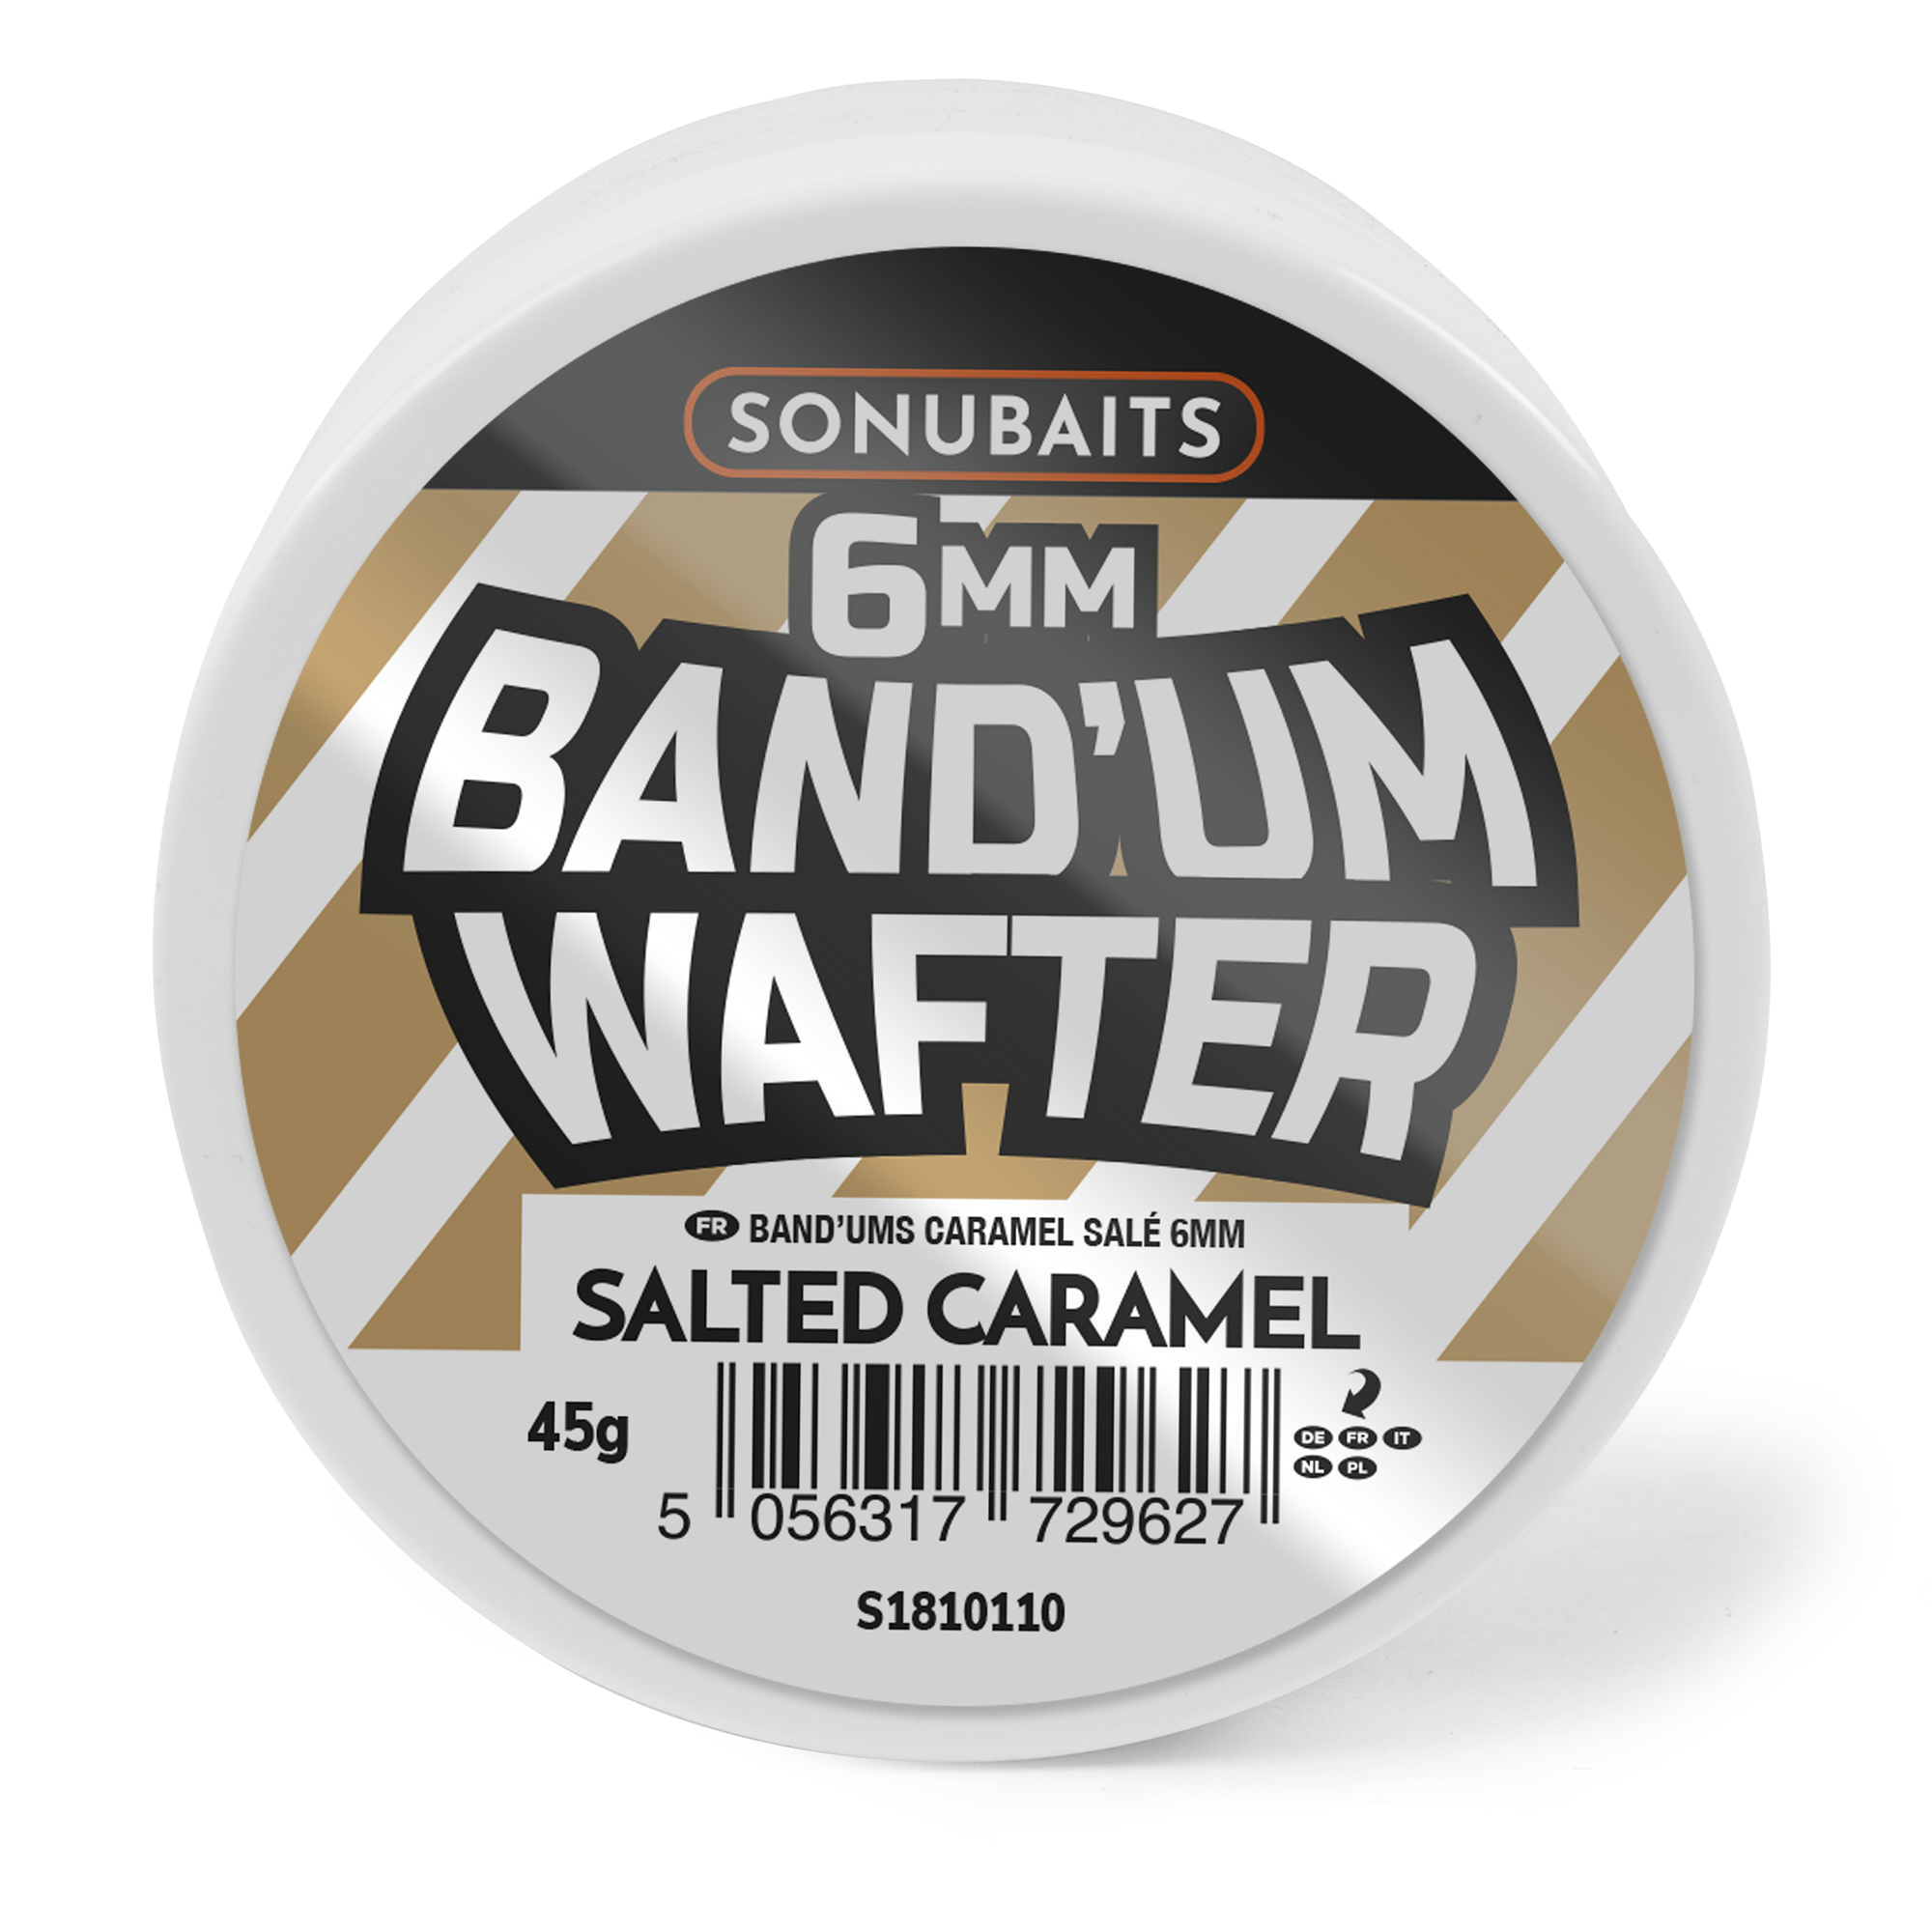 Sonubaits Band'um Wafters 6mm - Salted Caramel